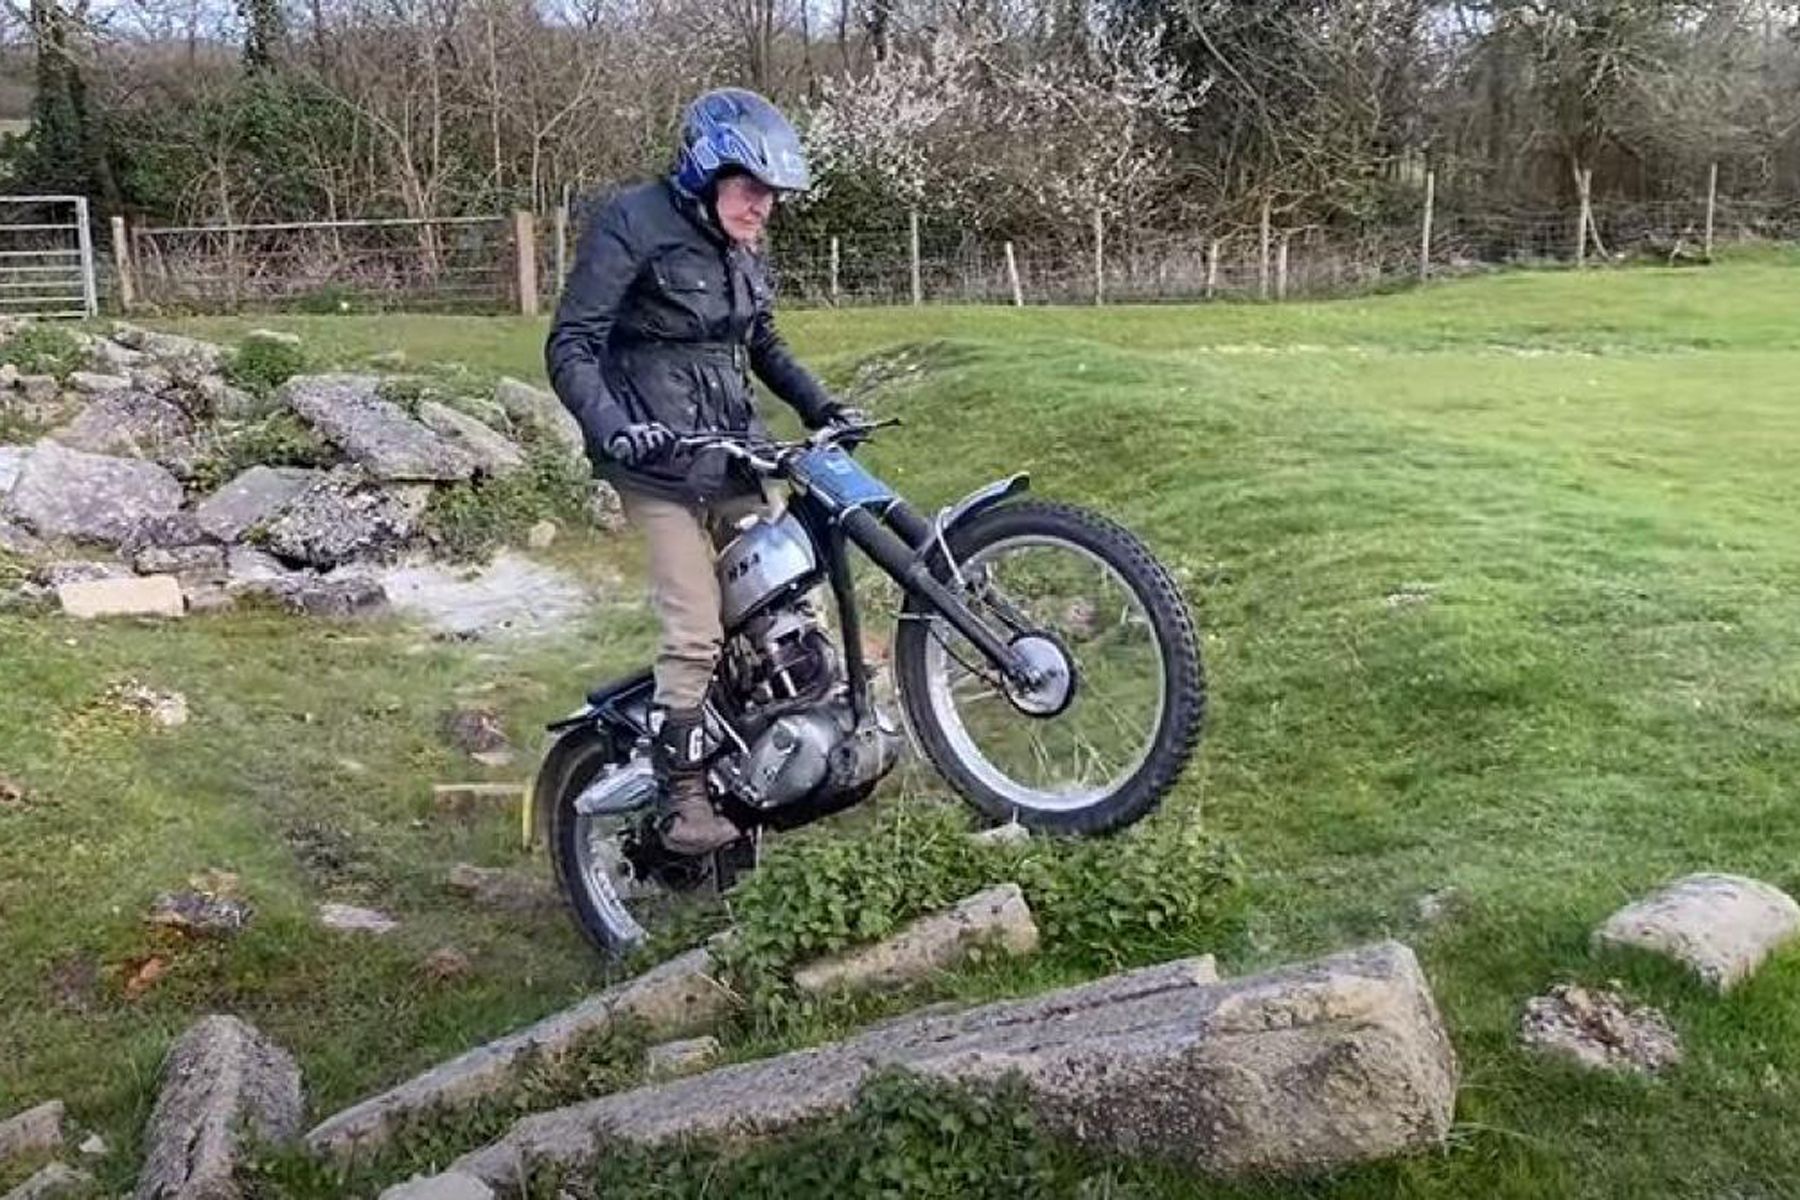 Watch this 86-year-old effortlessly toss a motorcycle around off